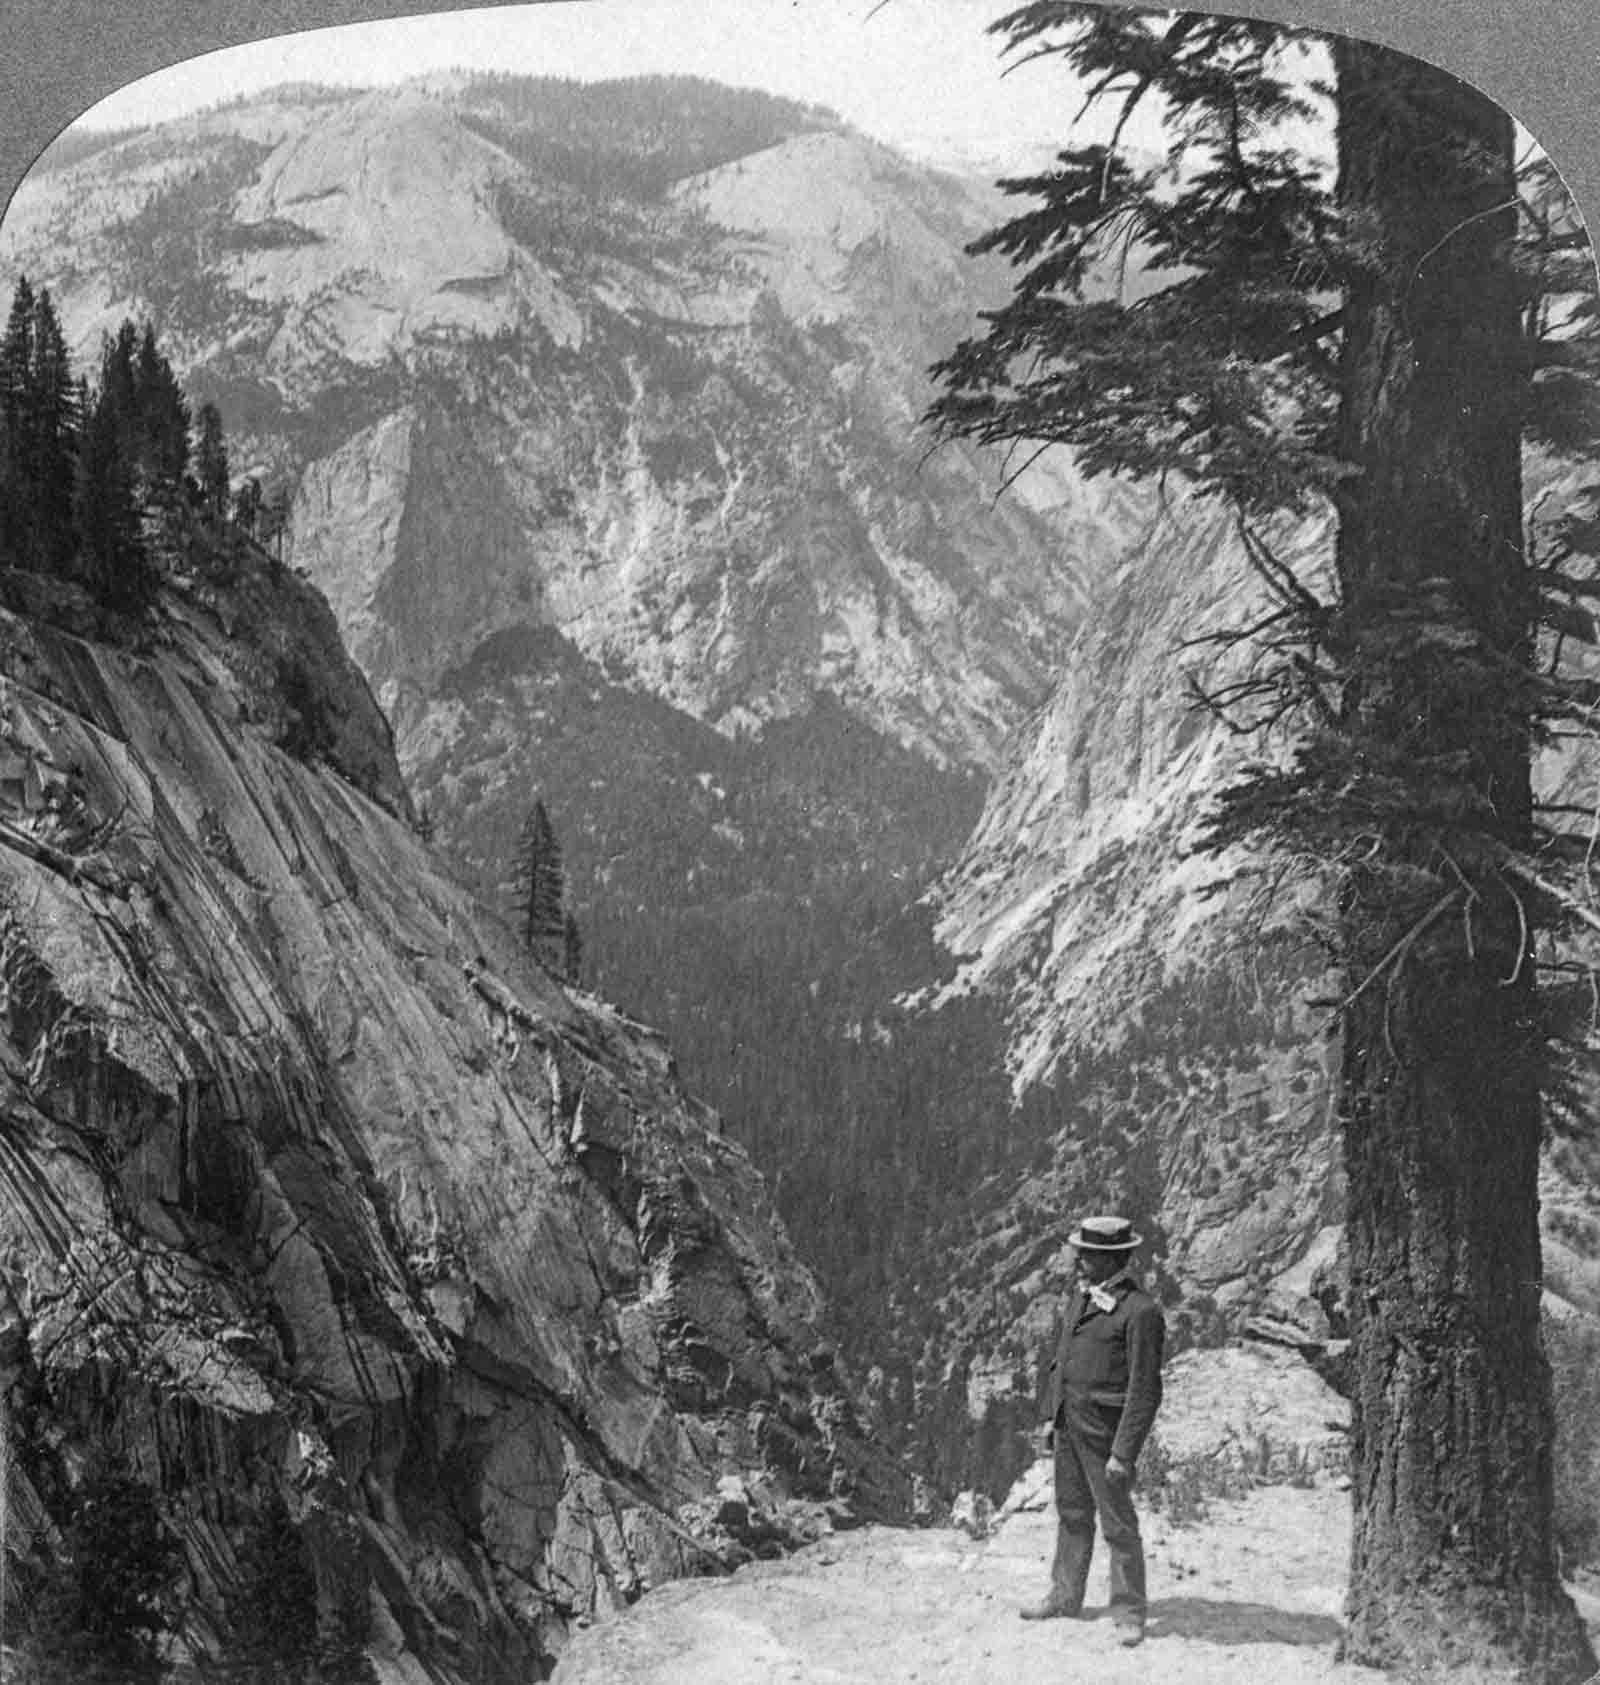 A tourist looks out over the Yosemite Valley, 1902.